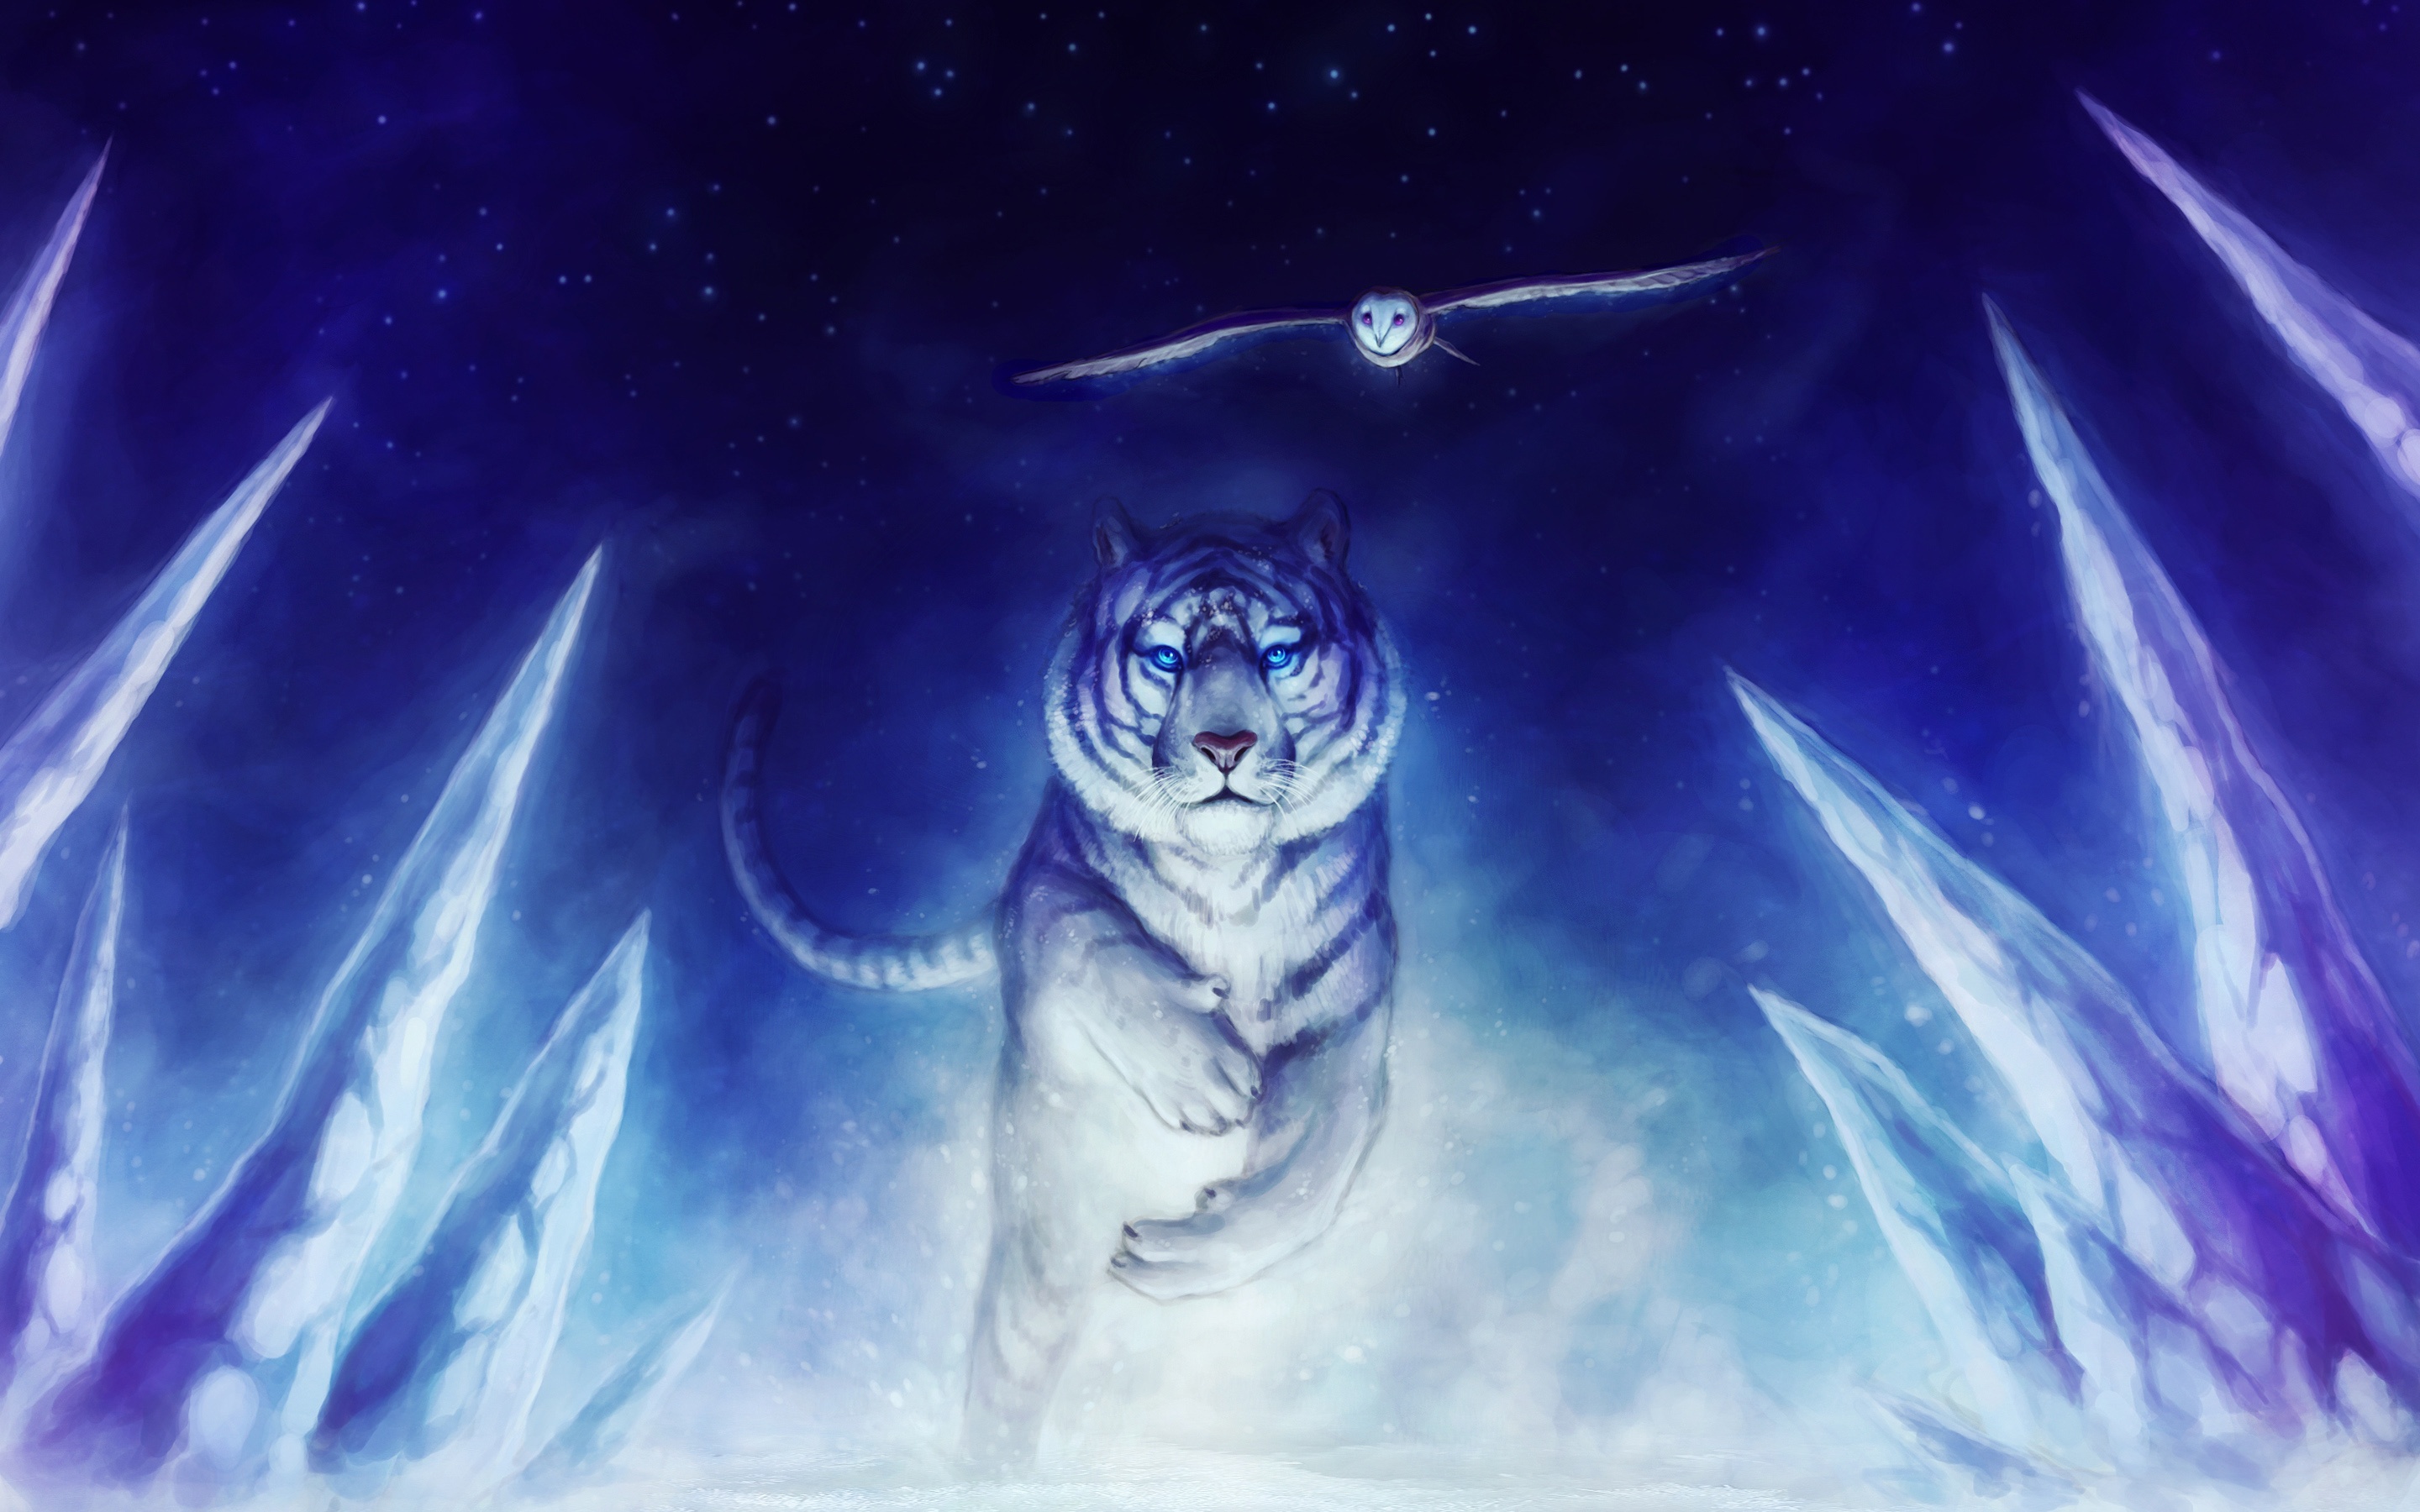 White Tiger Owl Art - Cool White Tiger Backgrounds - HD Wallpaper 